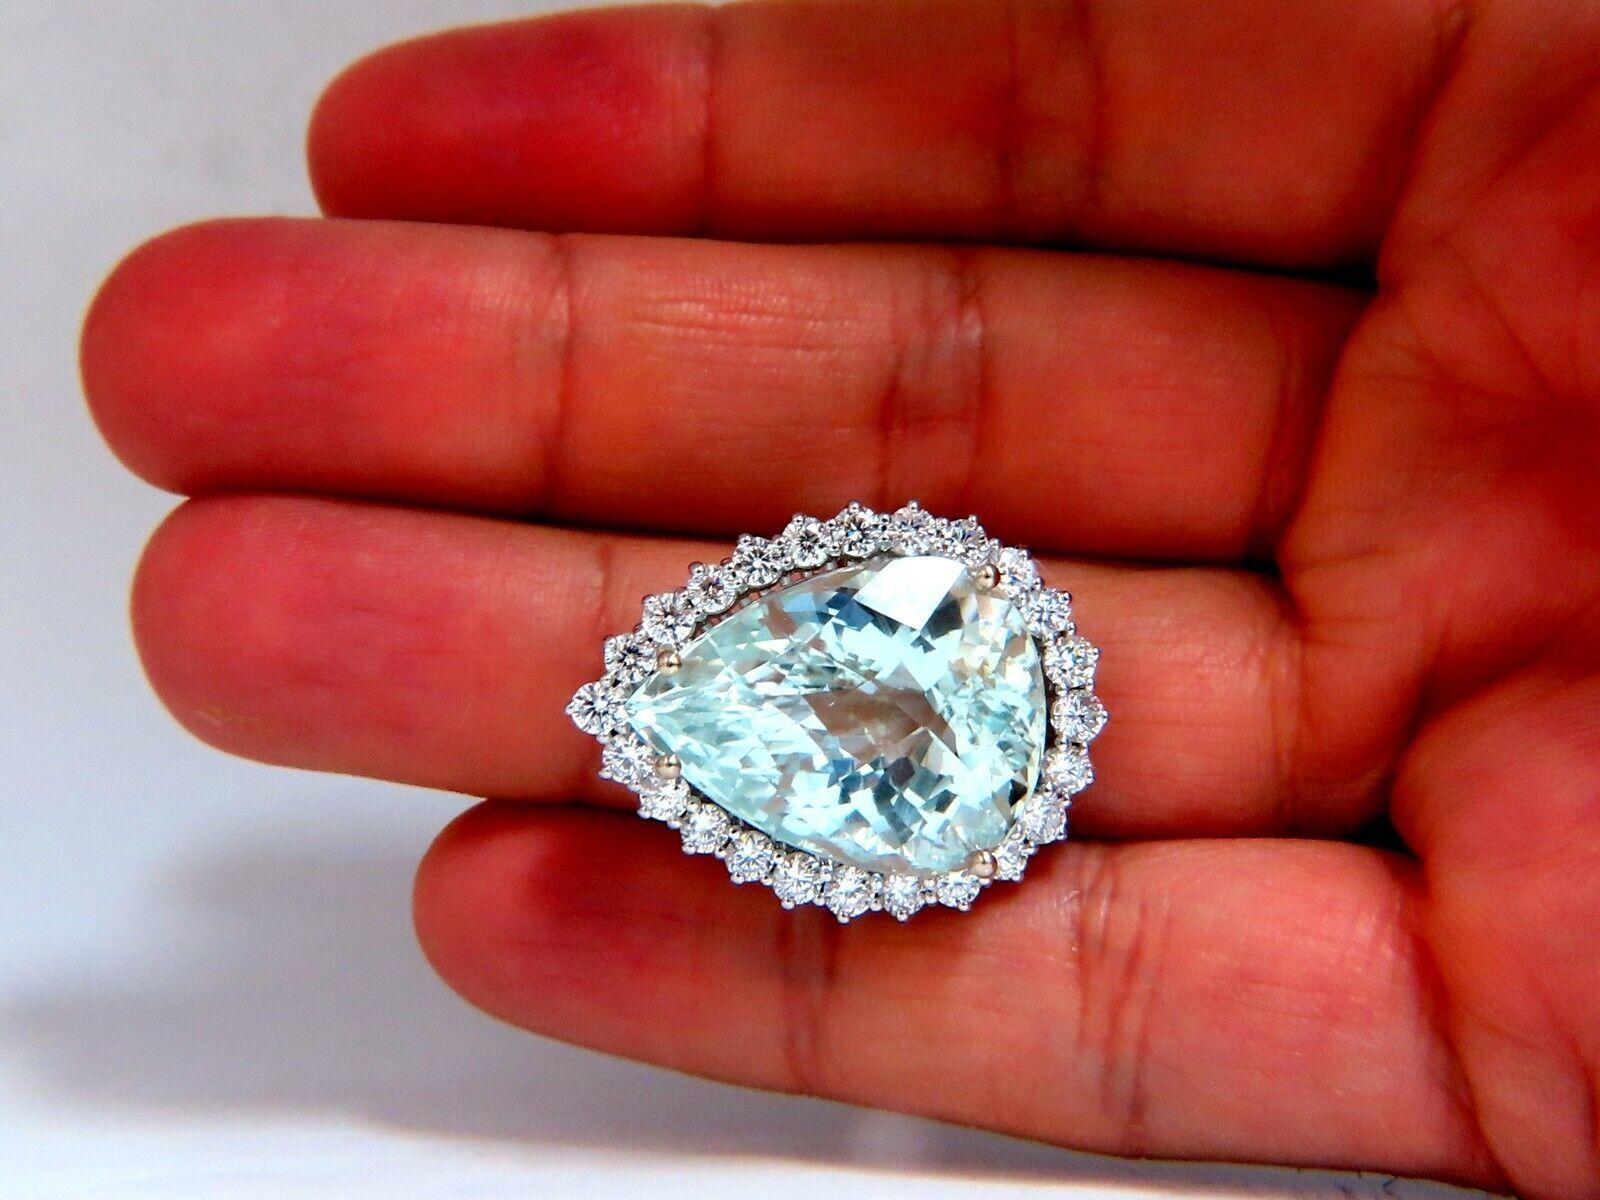 Late Victorian GIA Certified 29.31ct Natural Pear Shaped Aquamarine Diamonds Ring 14kt 12399 For Sale